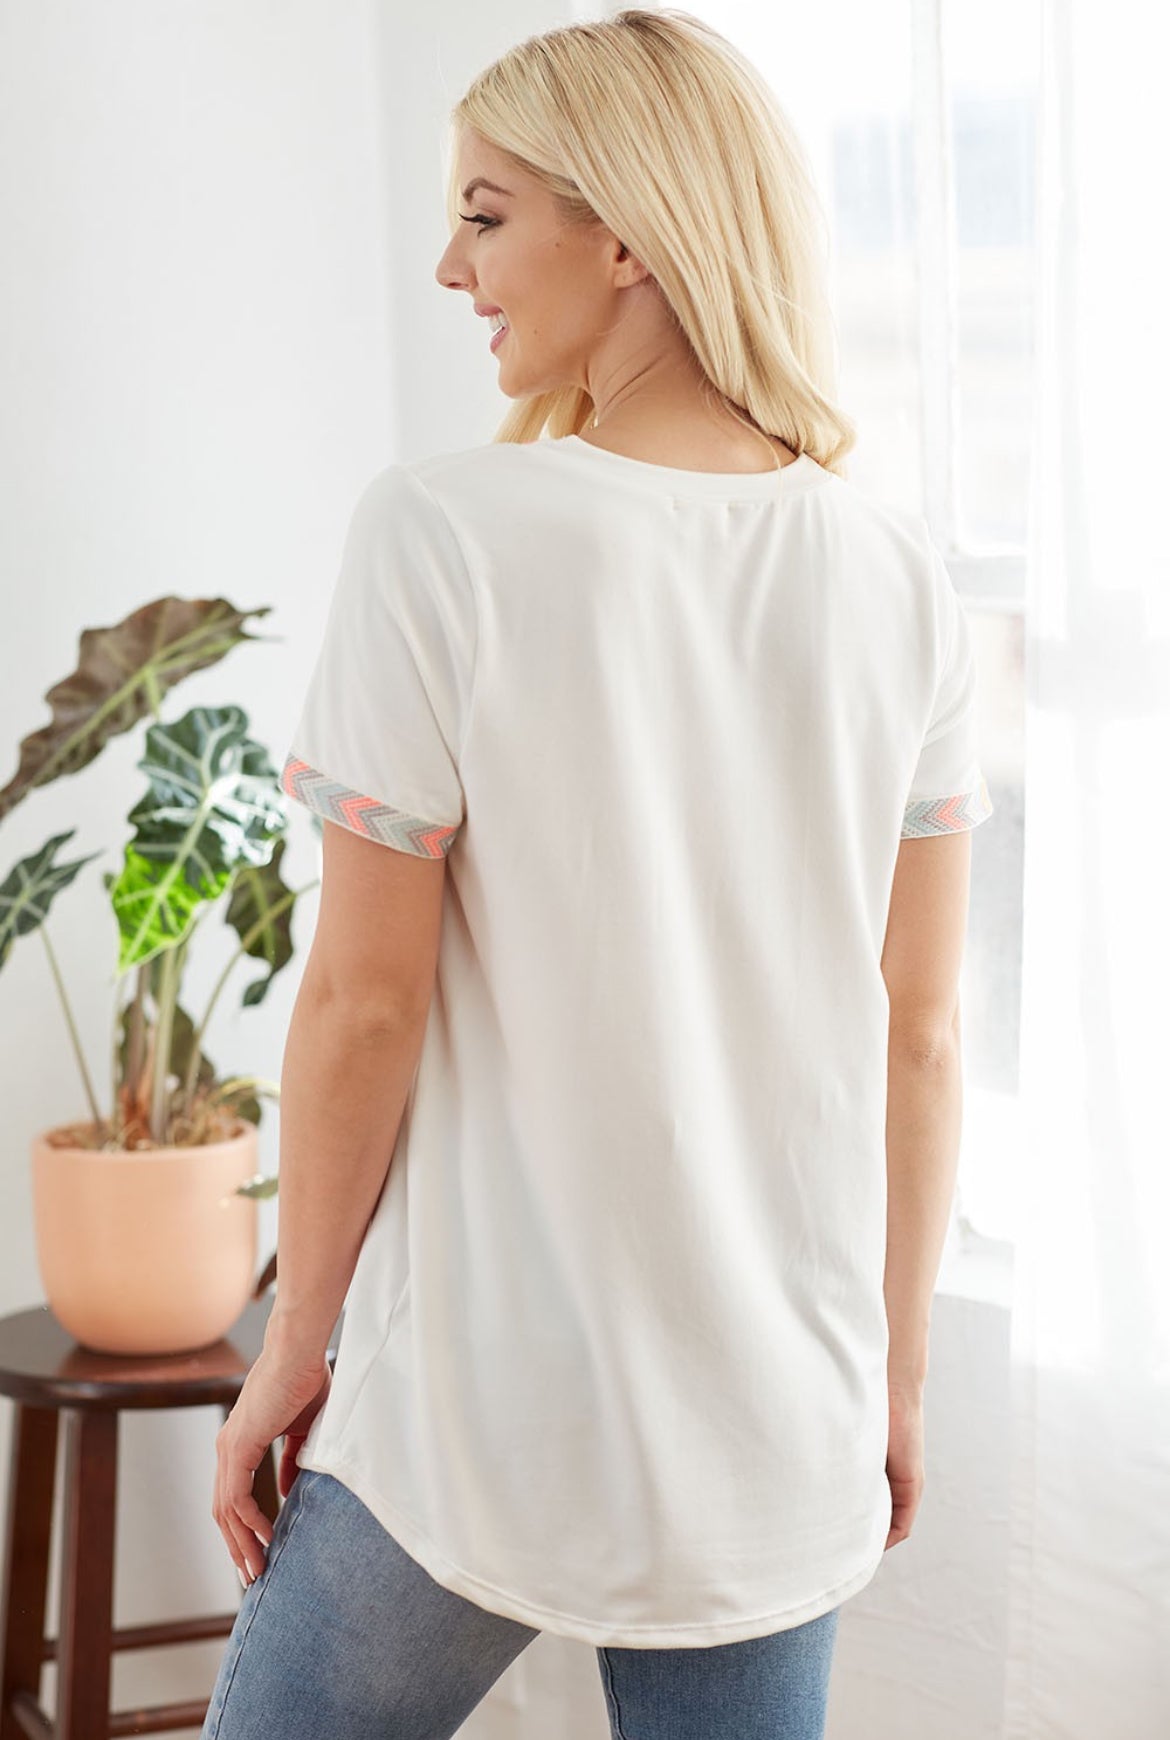 Effortless Accents T-Shirt